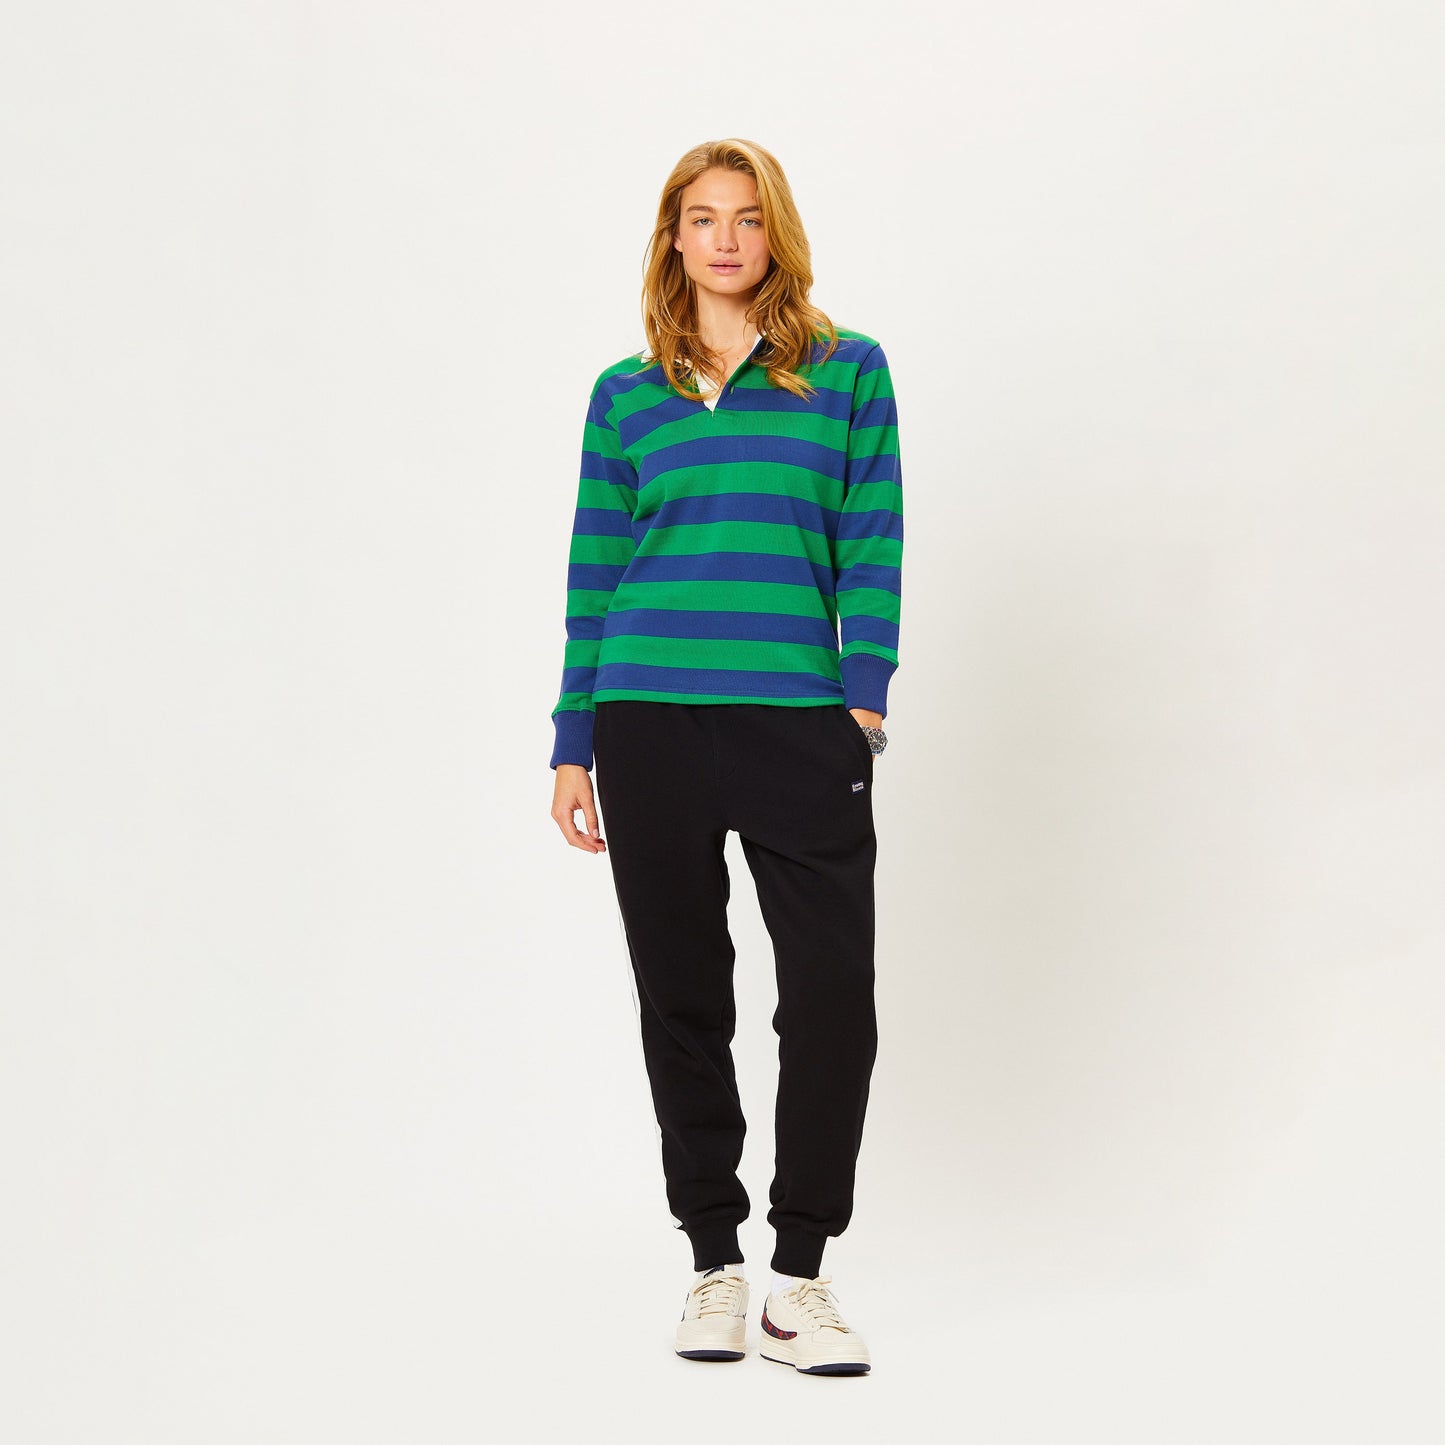 Female model wearing the Hockney Stripe Rugby in green and blue.